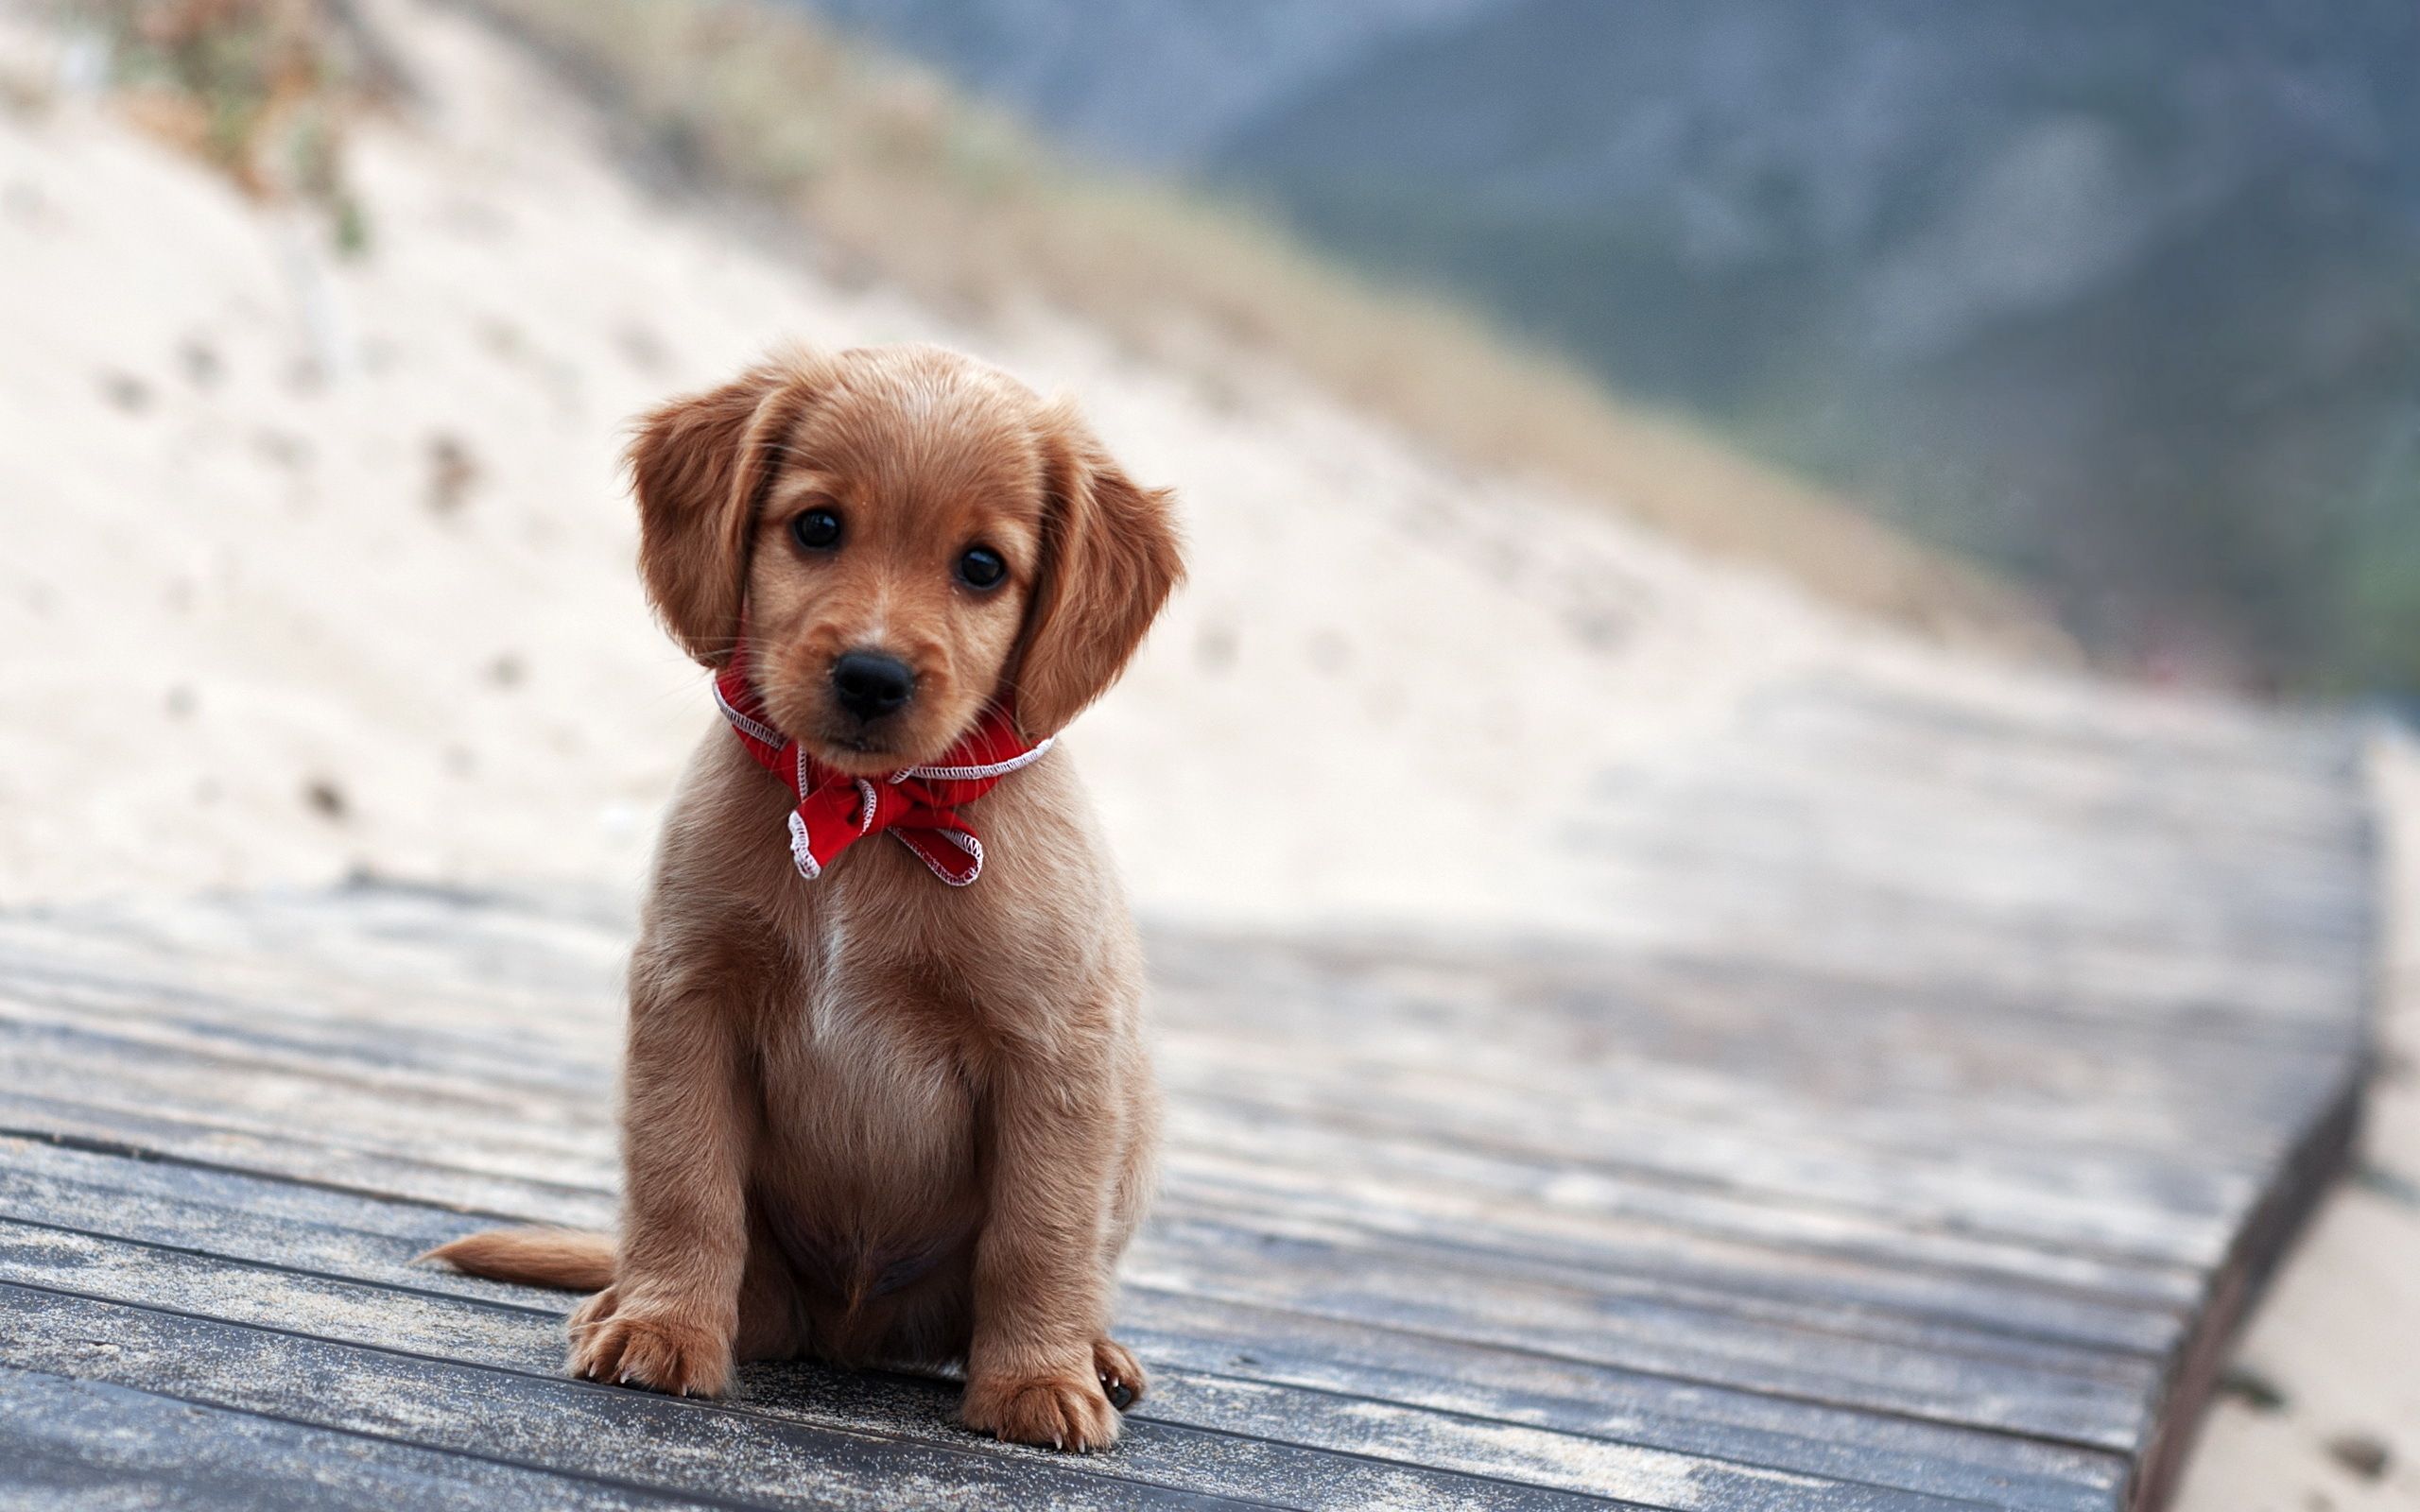 Cute puppy wallpapers and images - wallpapers, pictures, photos